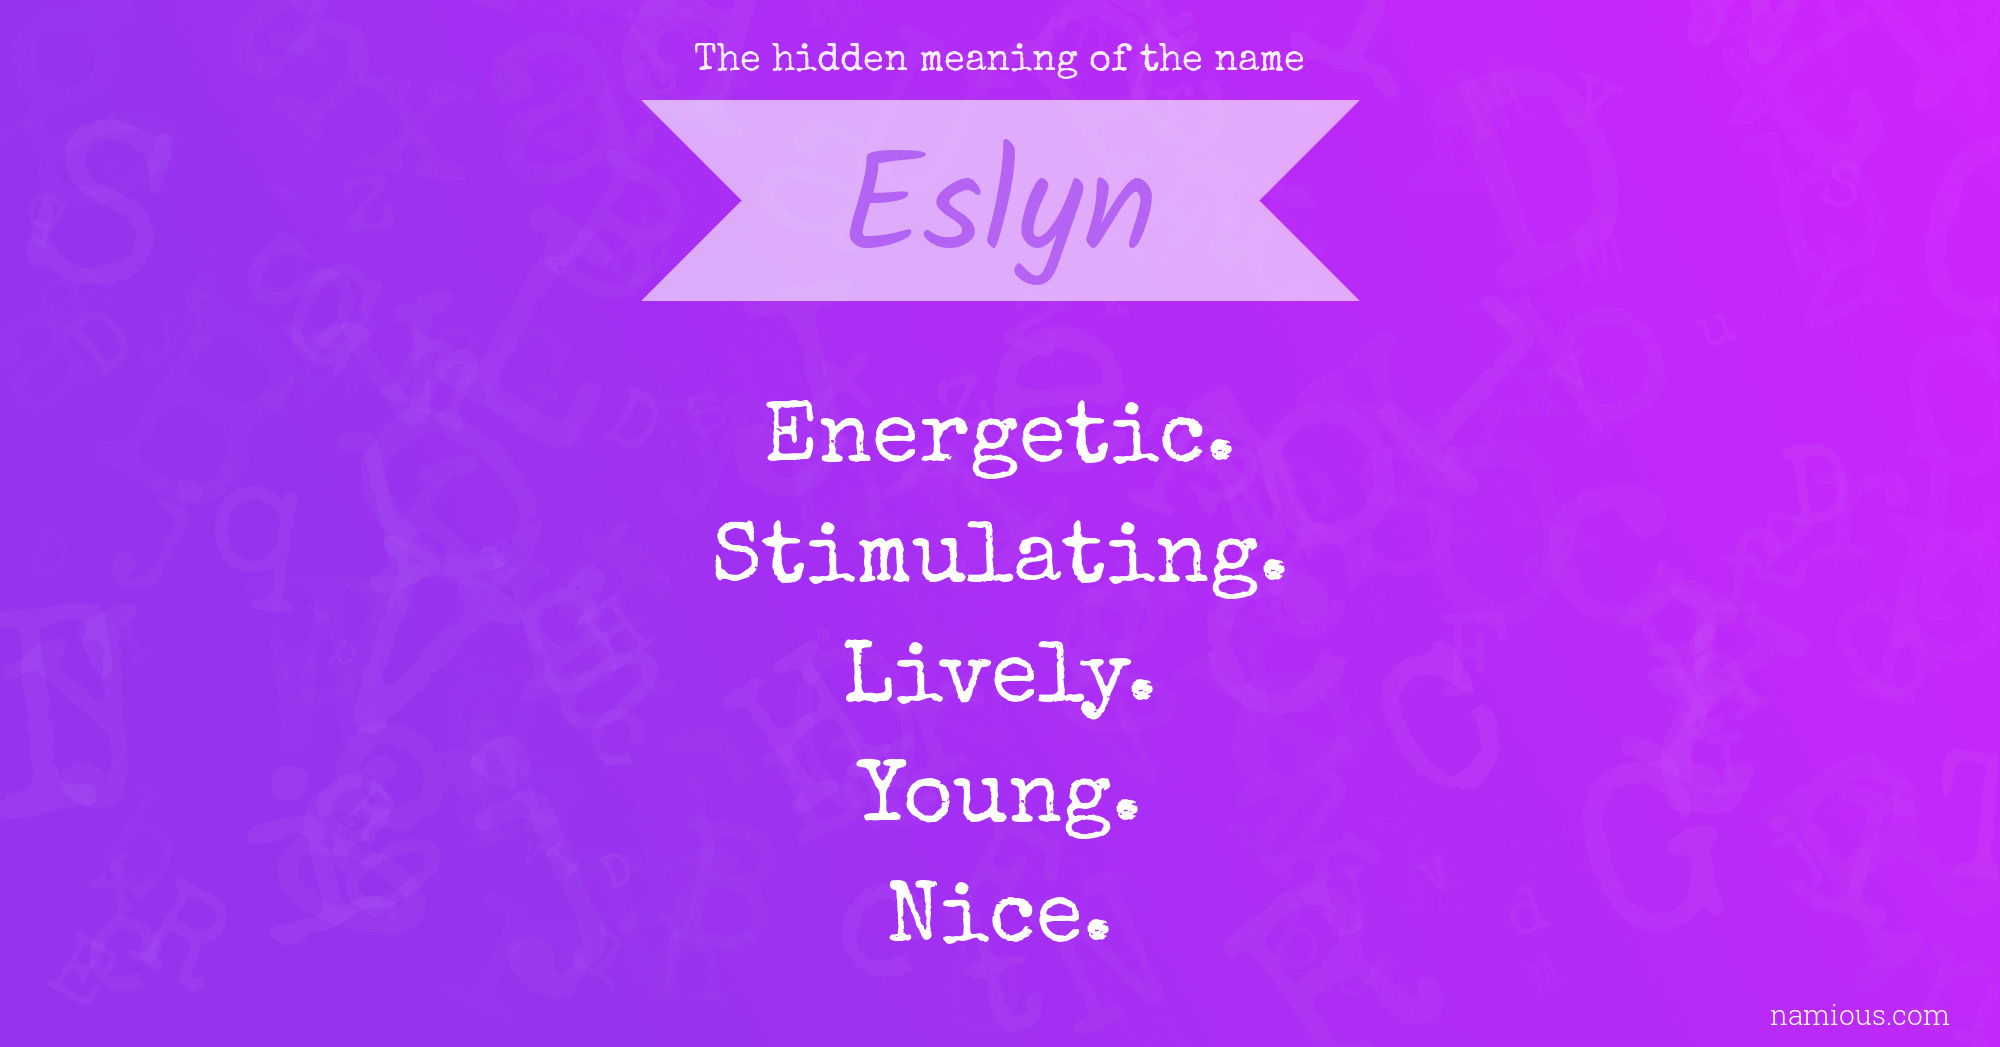 The hidden meaning of the name Eslyn